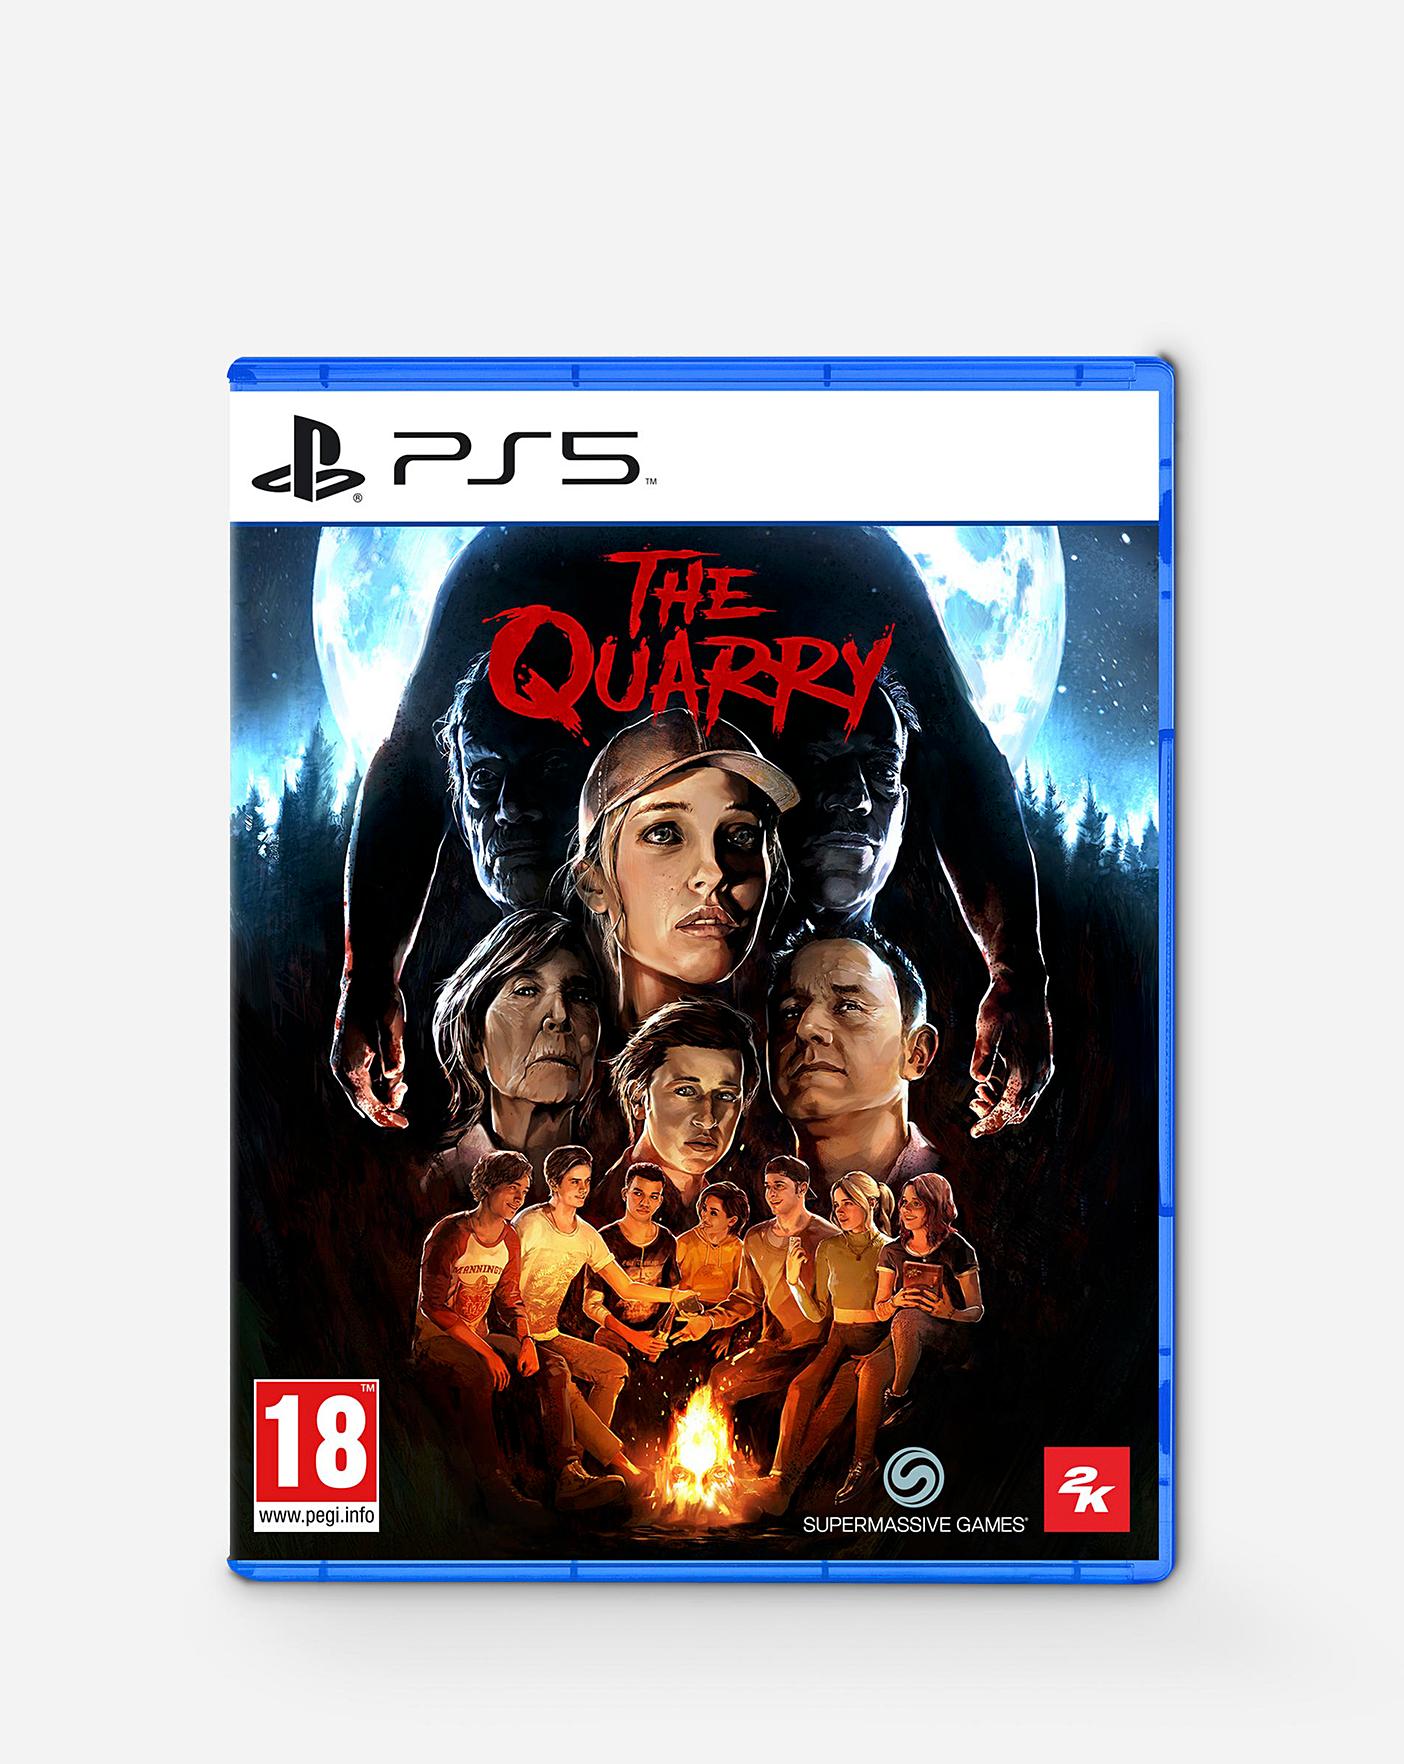  The Quarry: Standard - Steam PC [Online Game Code]